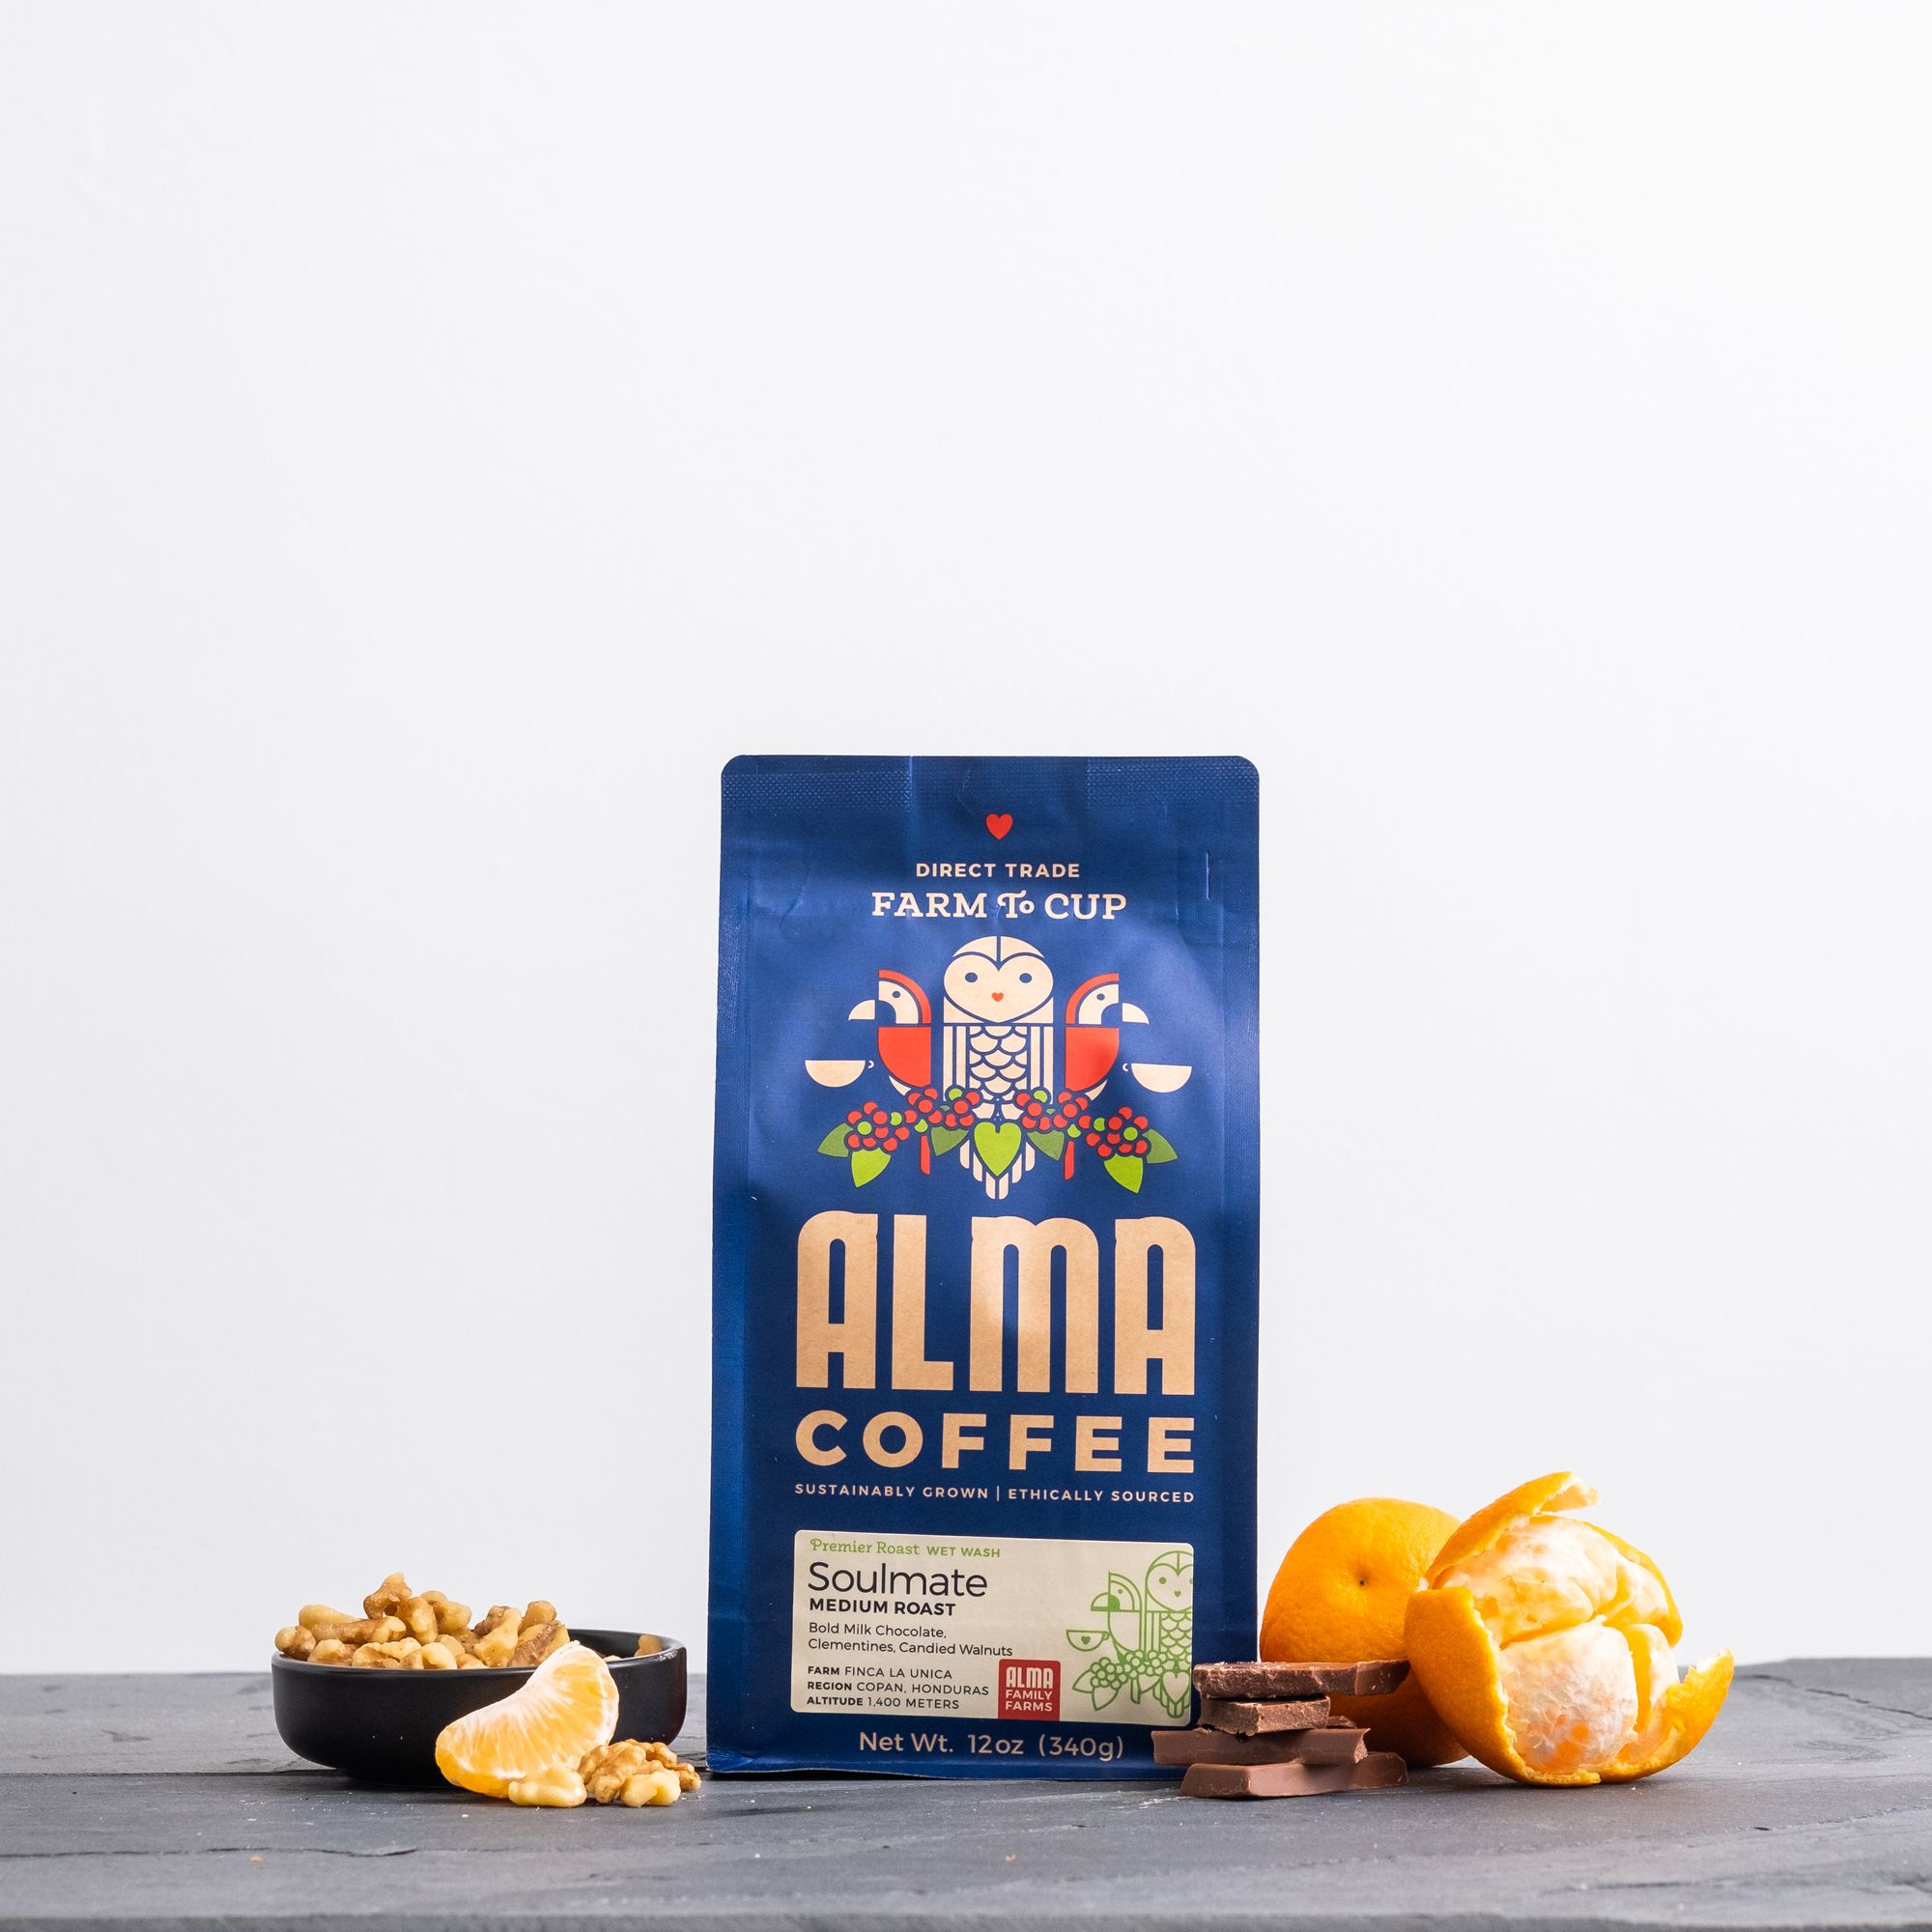 For all the amazing caffeine lovers out there - Alma Coffee